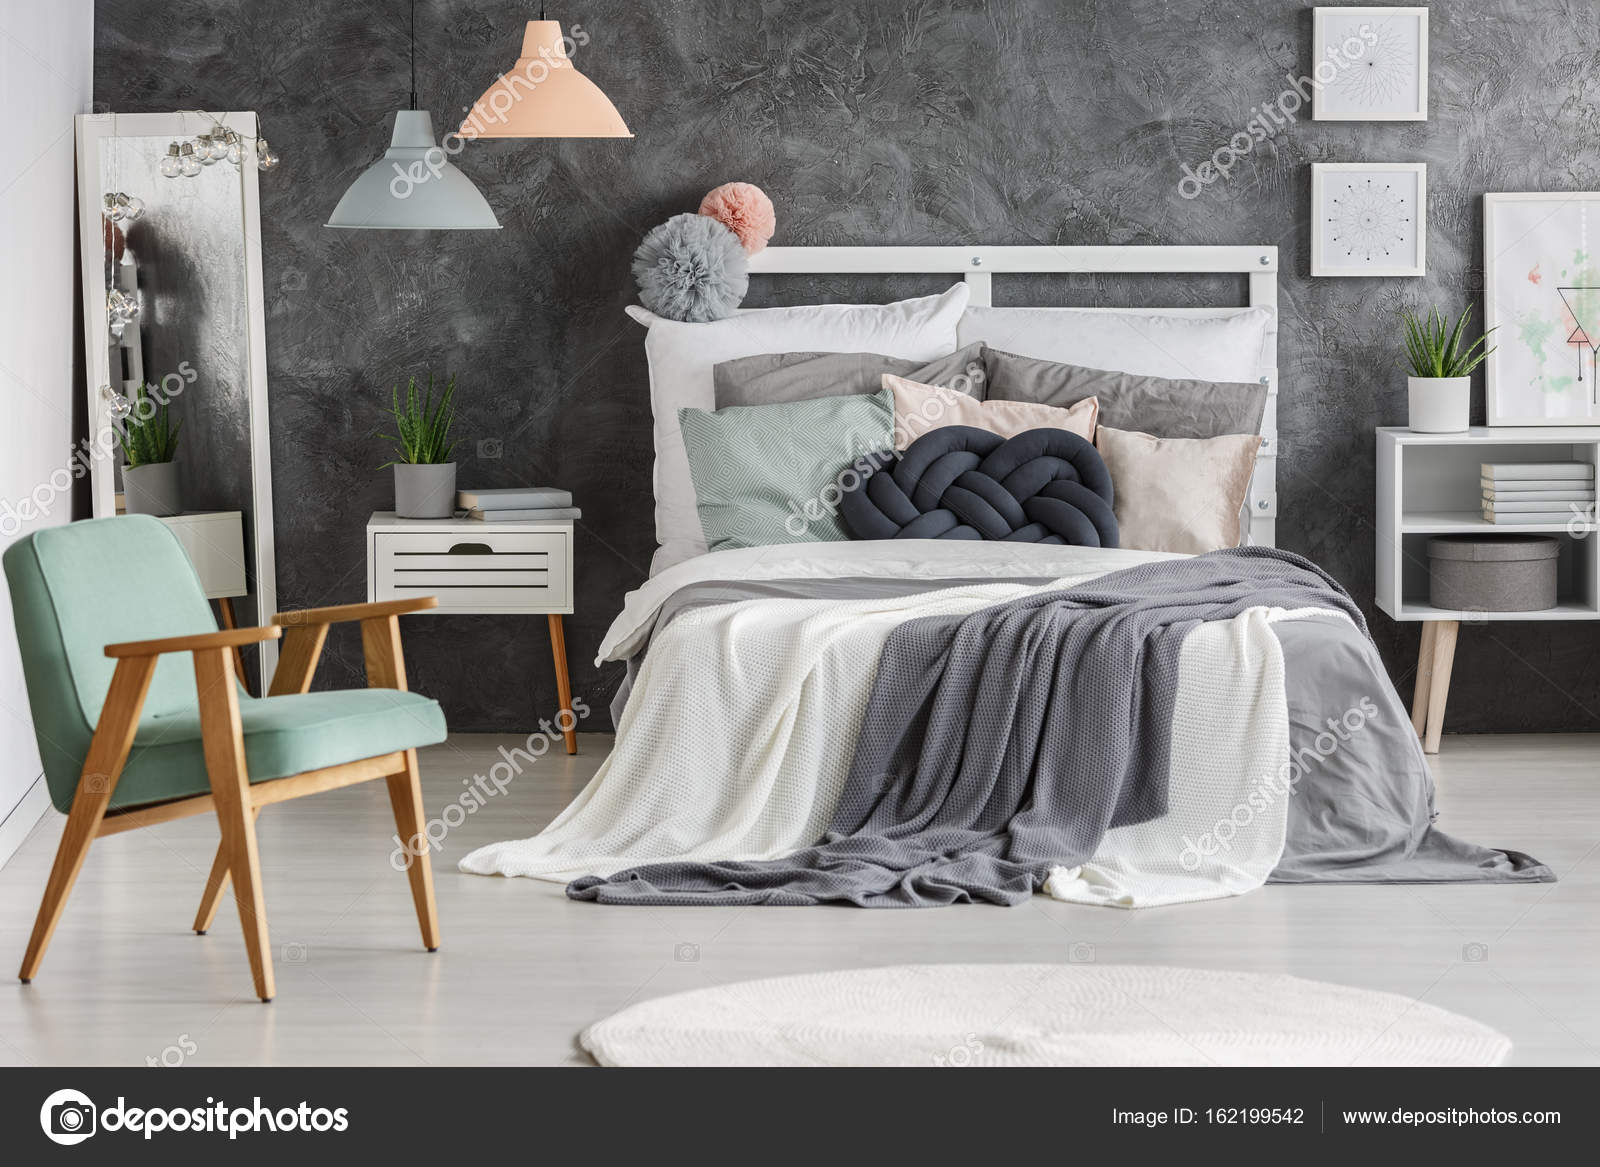 Bed With Messy Blankets Stock Photo C Photographee Eu